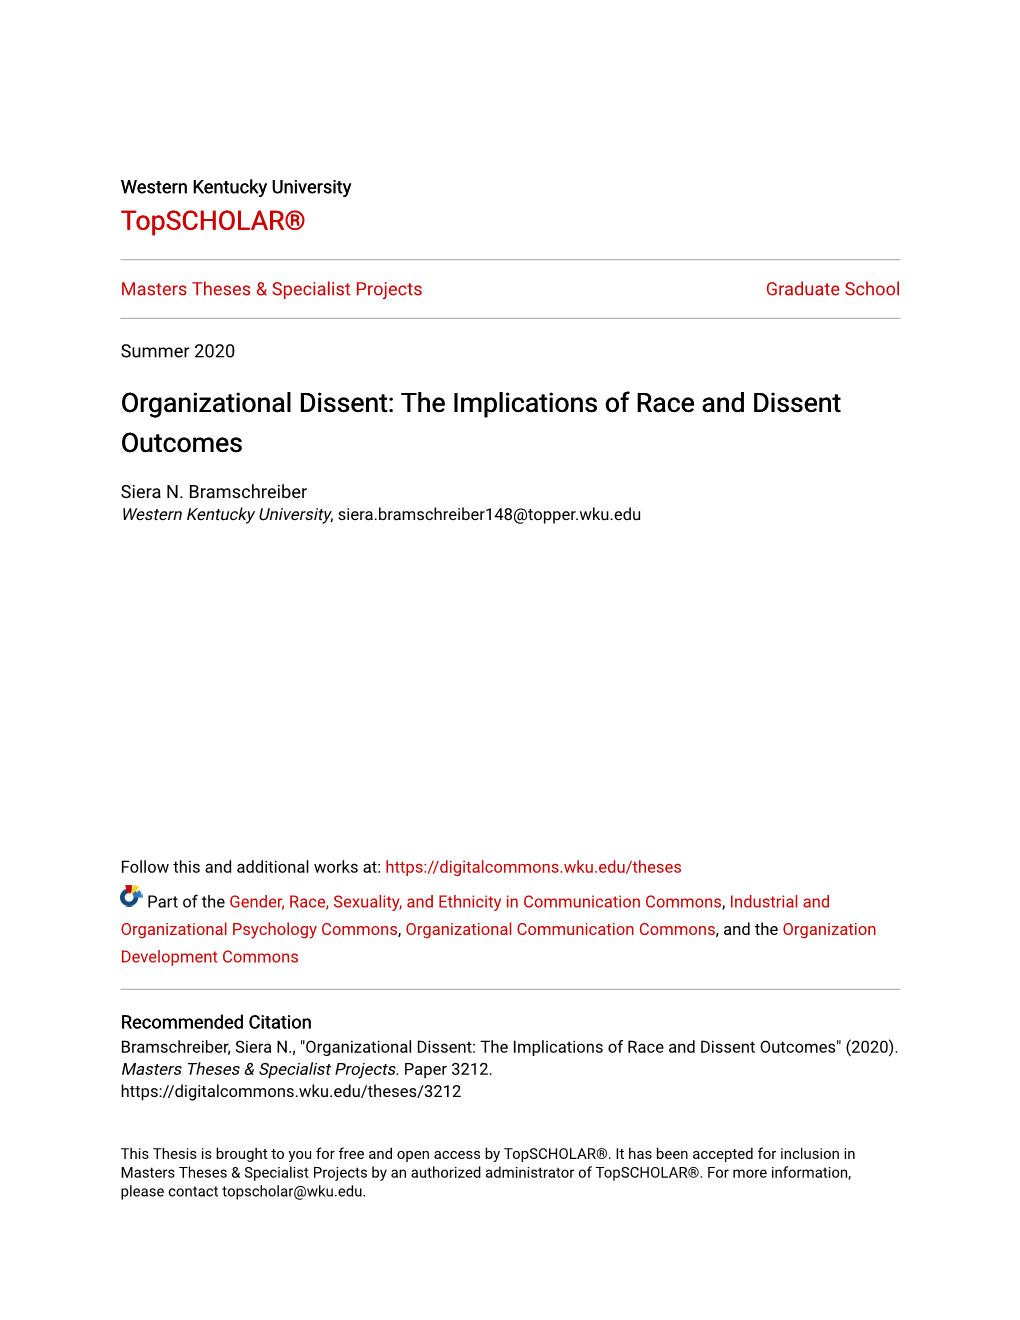 Organizational Dissent: the Implications of Race and Dissent Outcomes